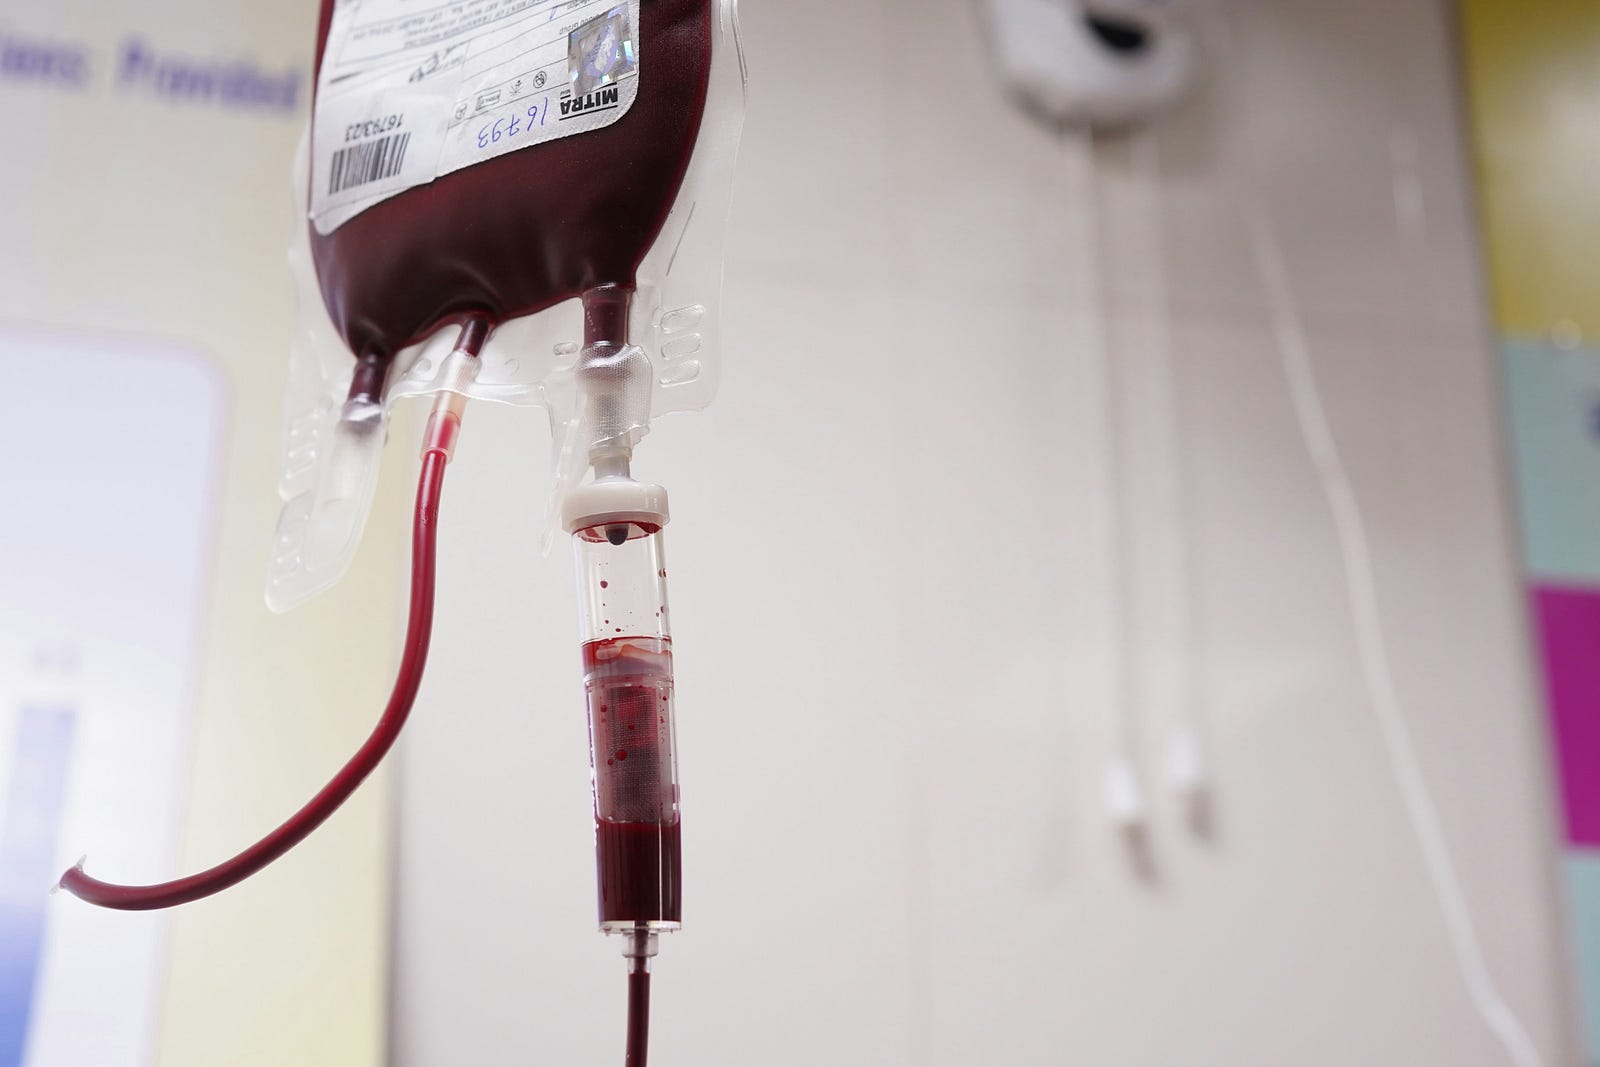 A blood tranfusion. Anti-aging entrepreneur Bryan Johnson admits that he will not repeat the infusions, given no discernable benefits from the practice.